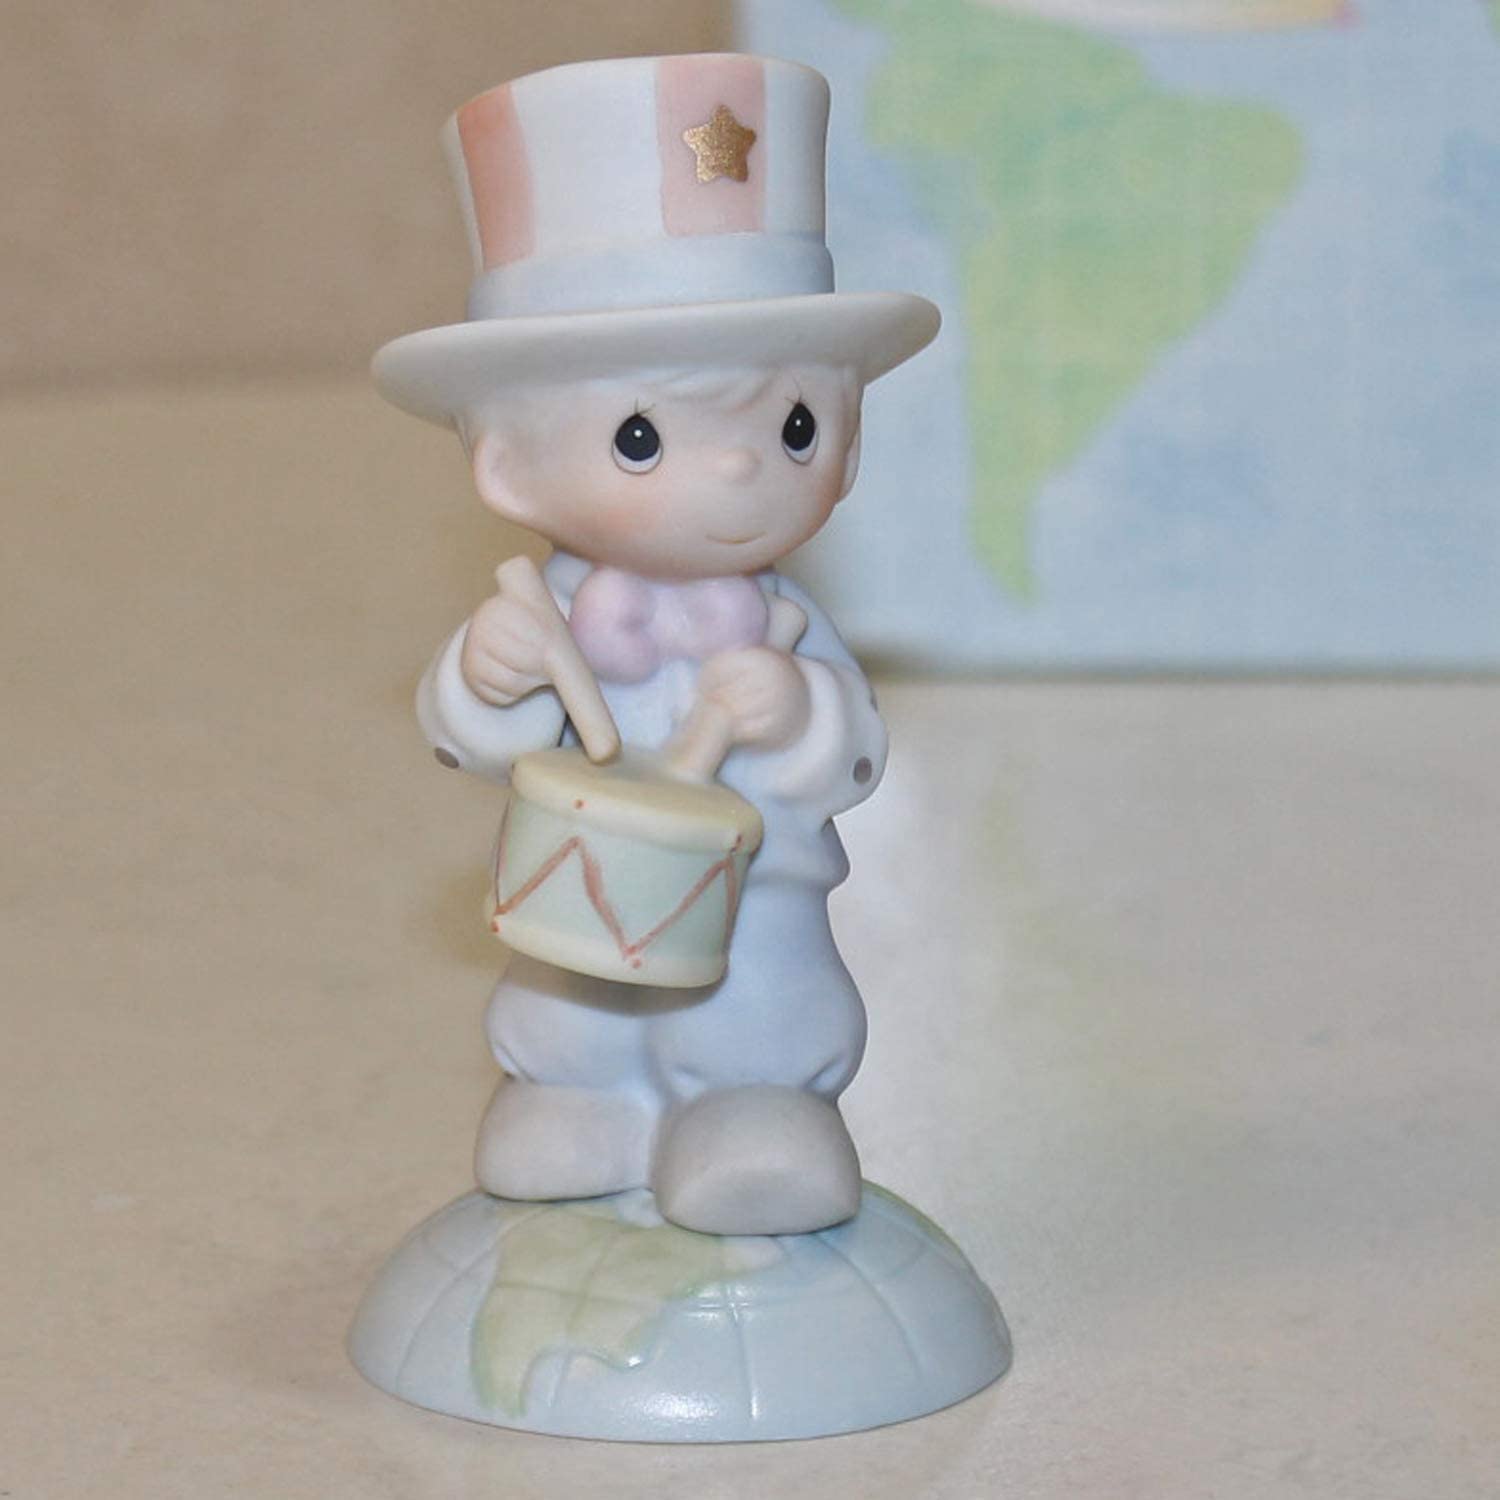 Precious Moments Figurine - Don't Rome to Far From Home